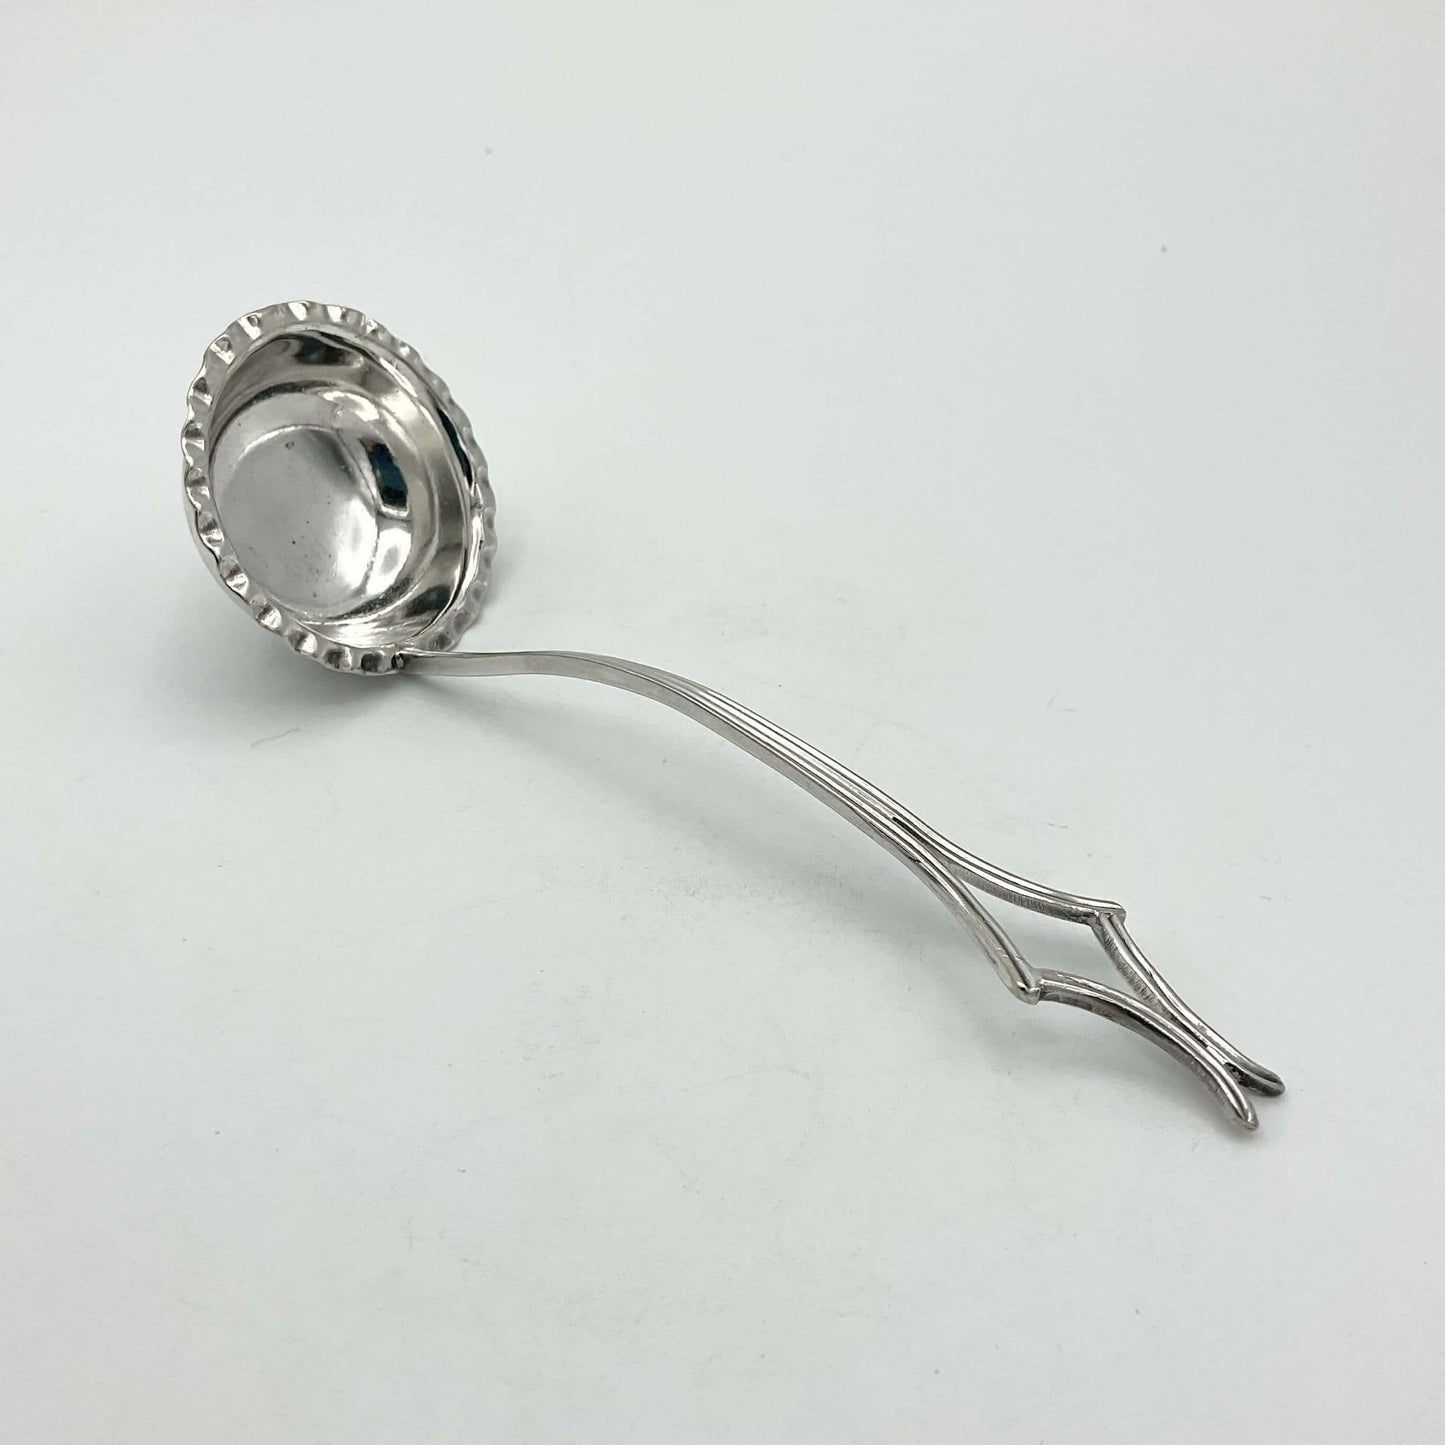 Vintage Small Silver Plated Sauce Ladle